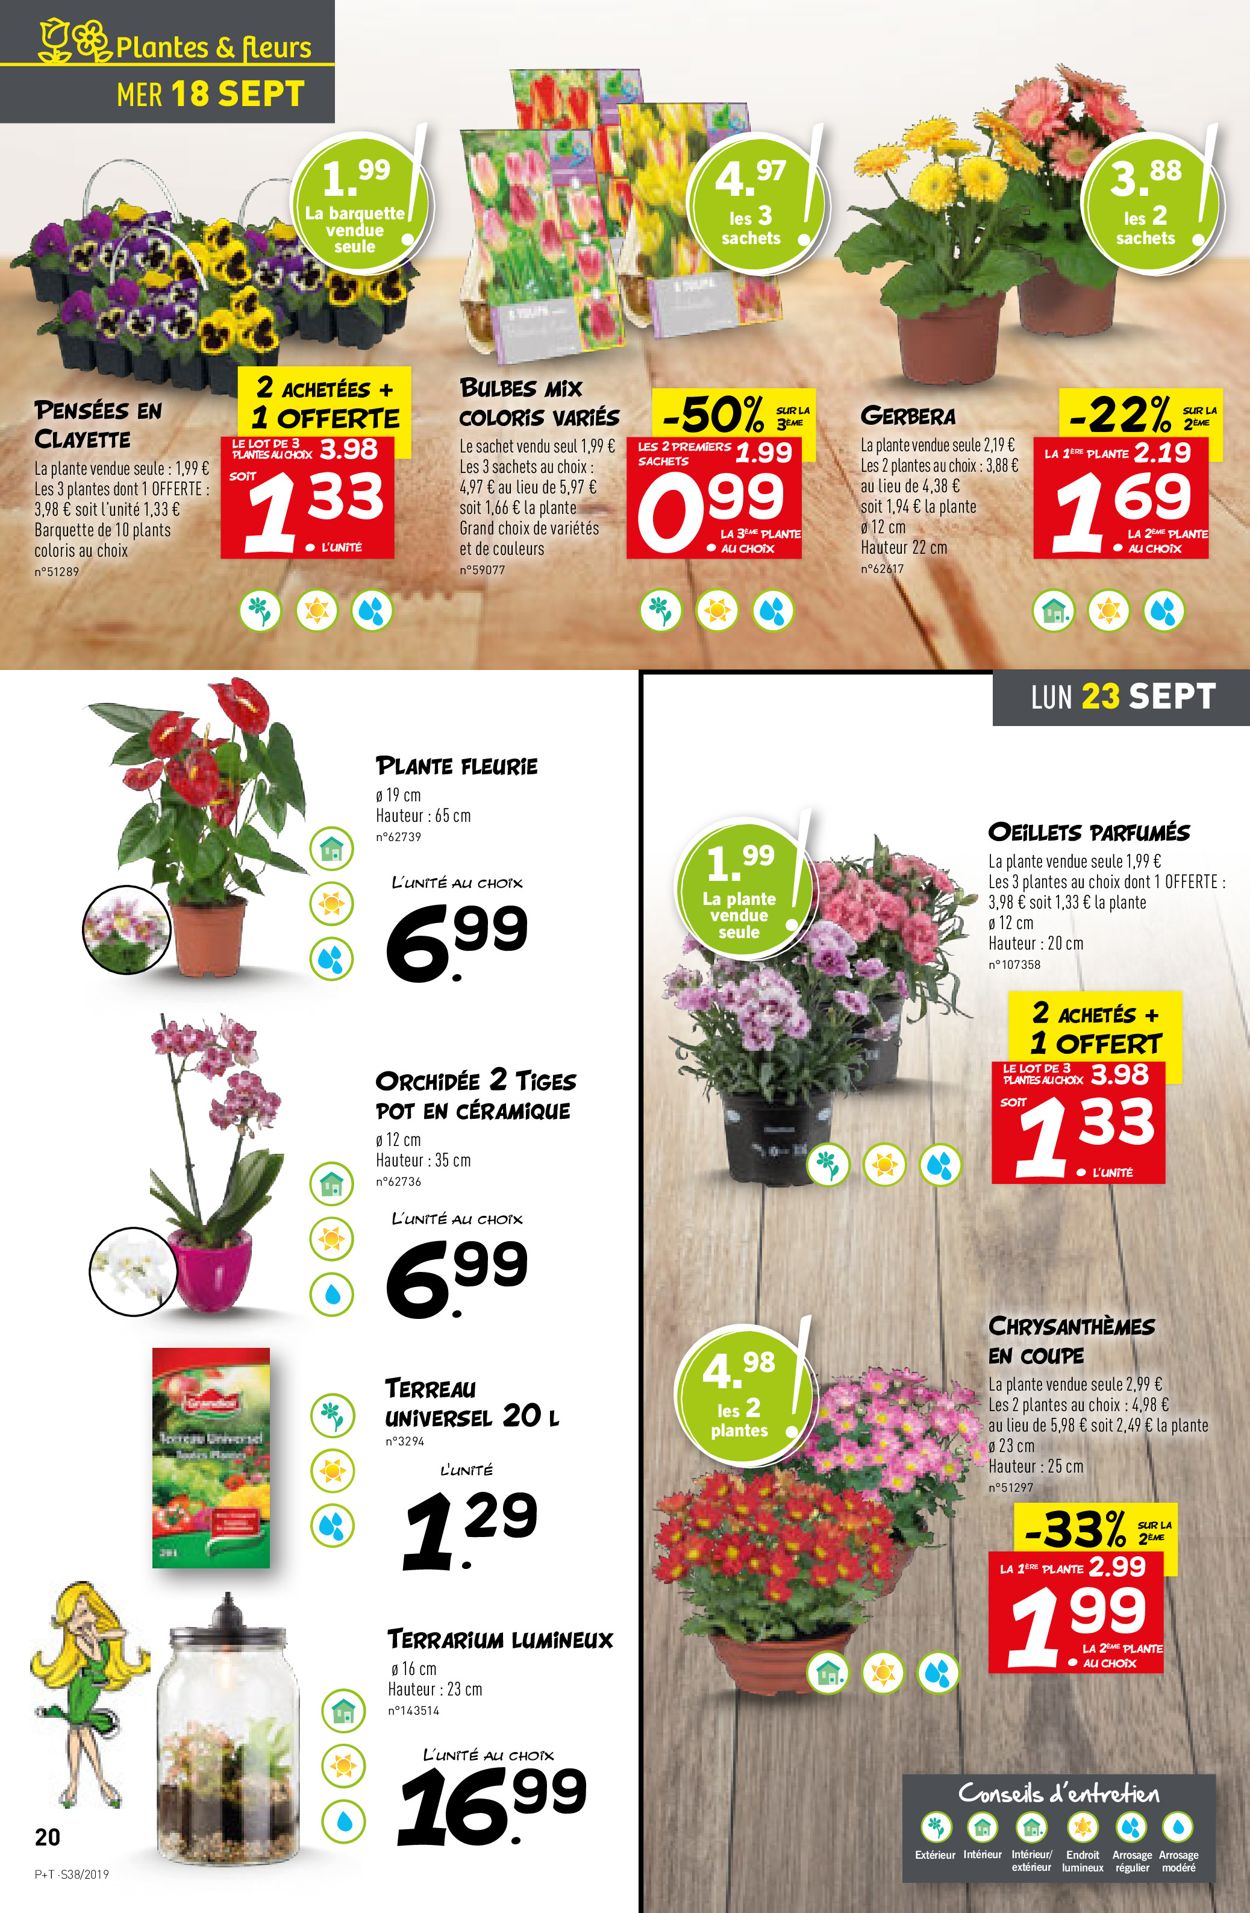 Lidl Catalogue - 18.09-24.09.2019 (Page 20)